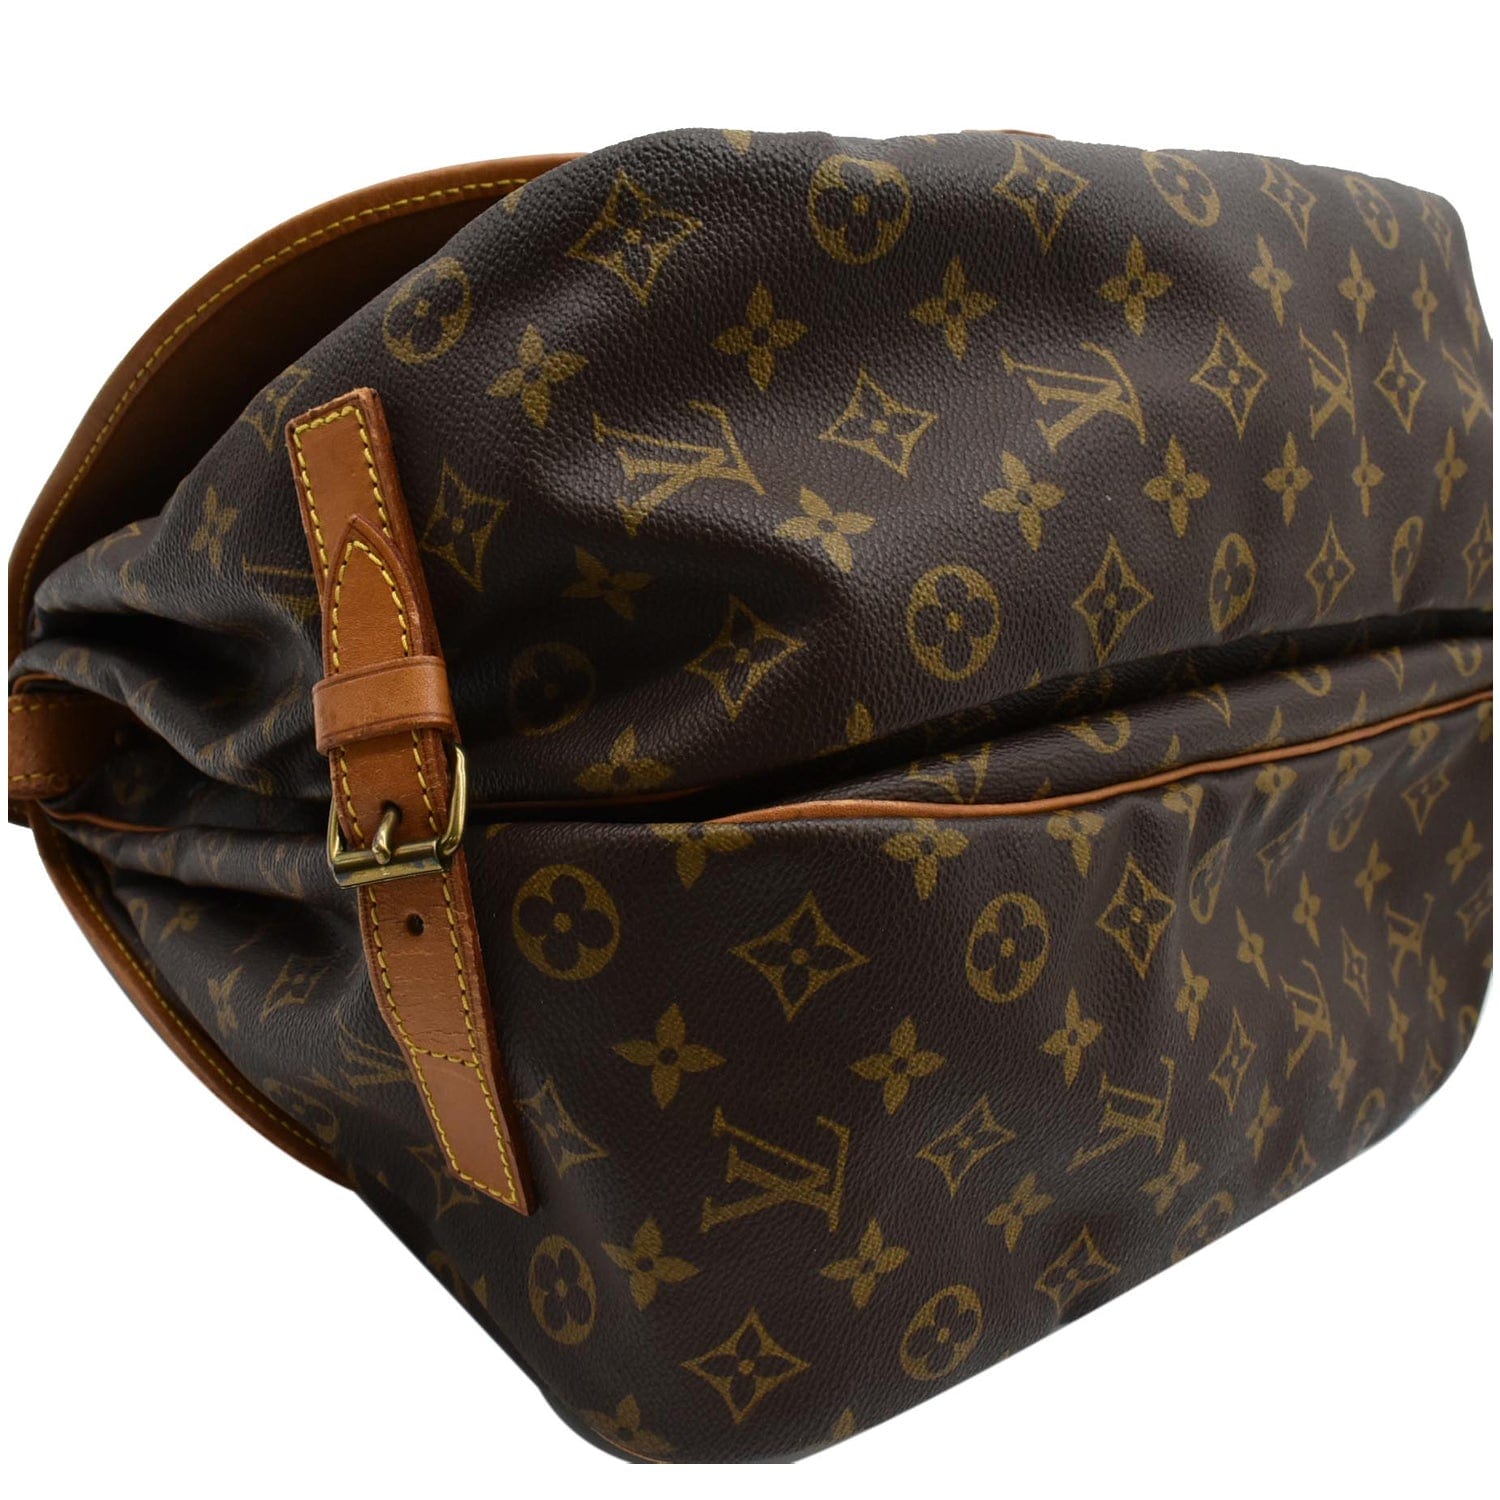 NEW NEW NEW - Saumur BB in MONOGRAM!! Such a cute and practical